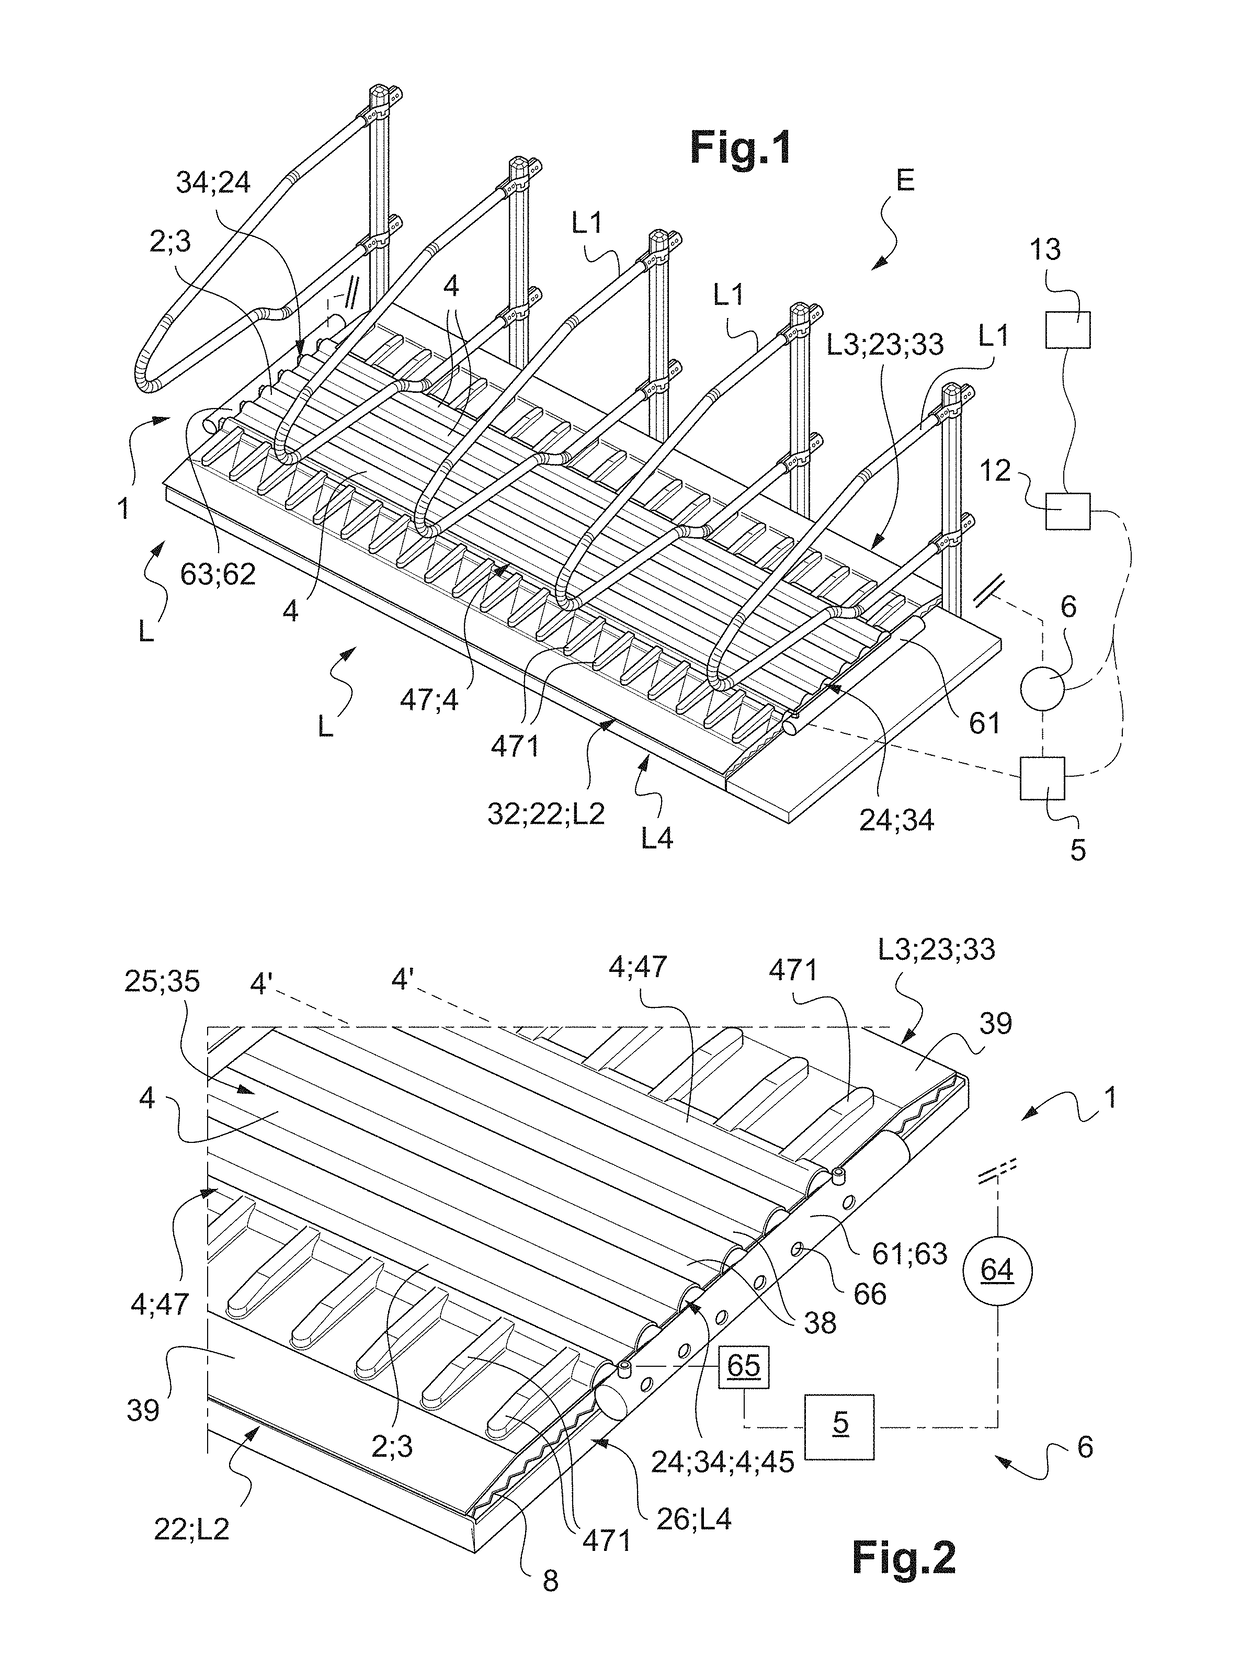 System for thermal comfort of animals in a livestock farming enclosure